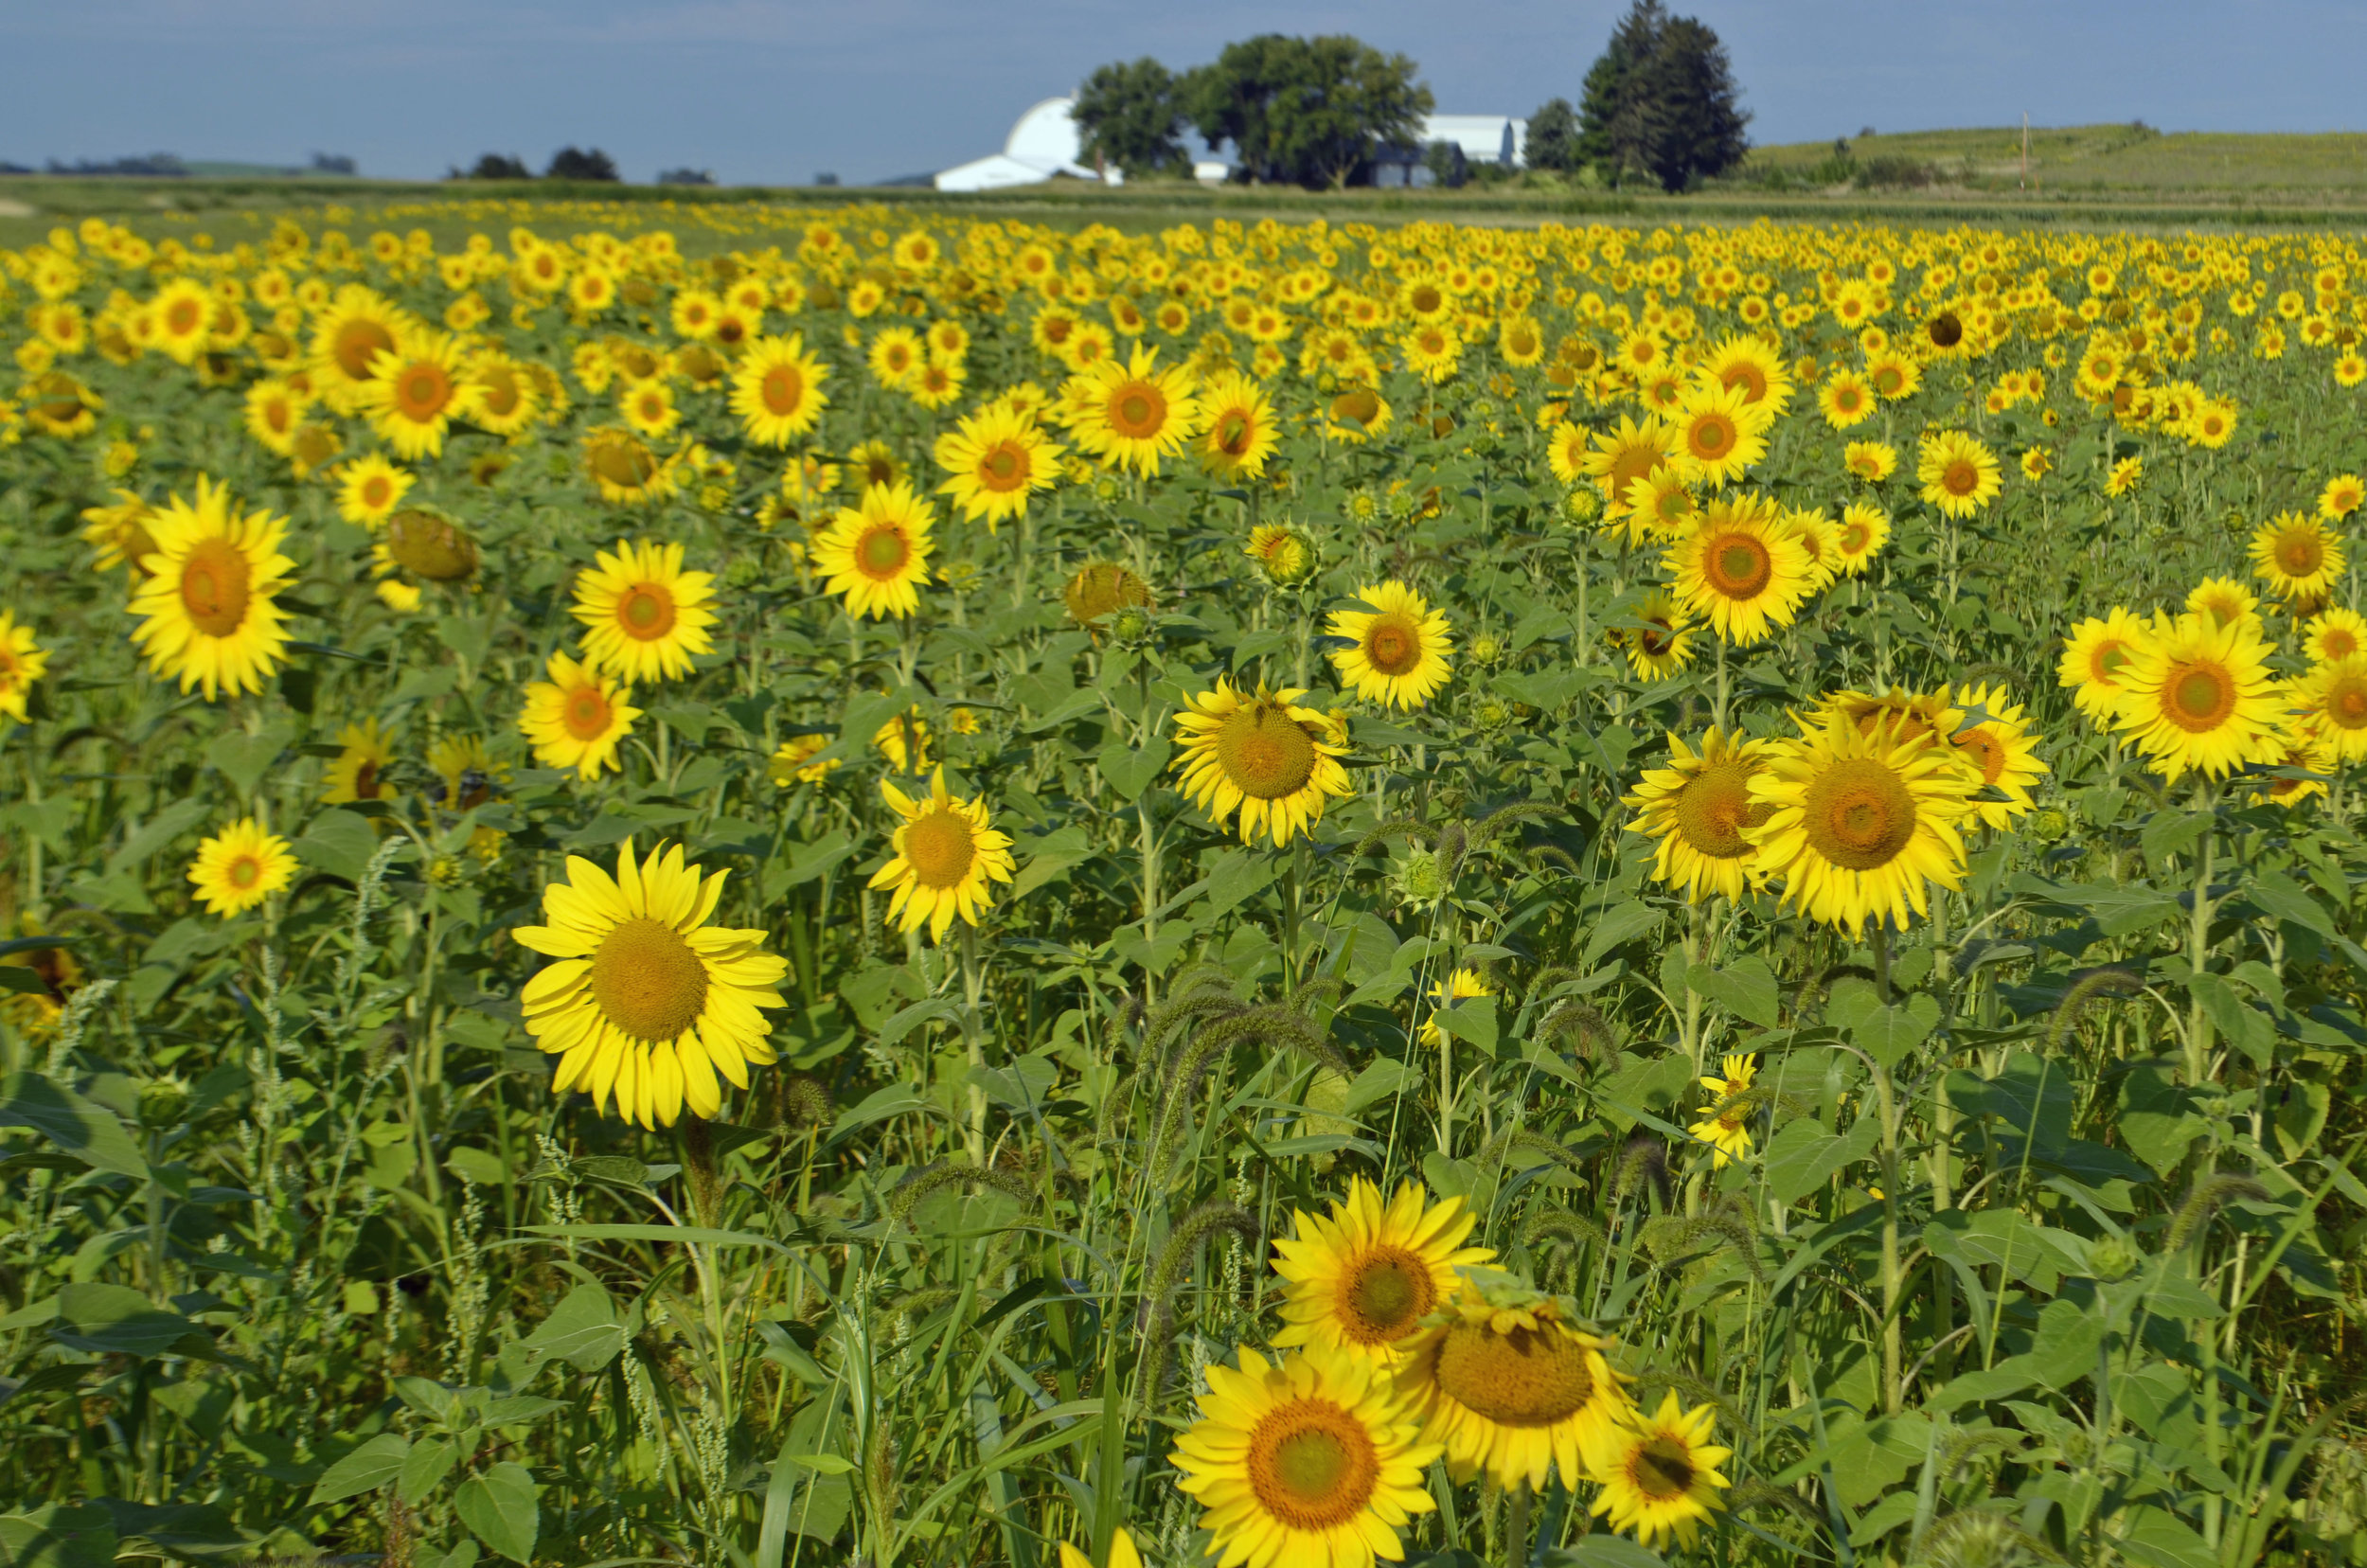   Sunflowers galore at the Goose Pond Sanctuary food plot. Photo by Mark Martin    